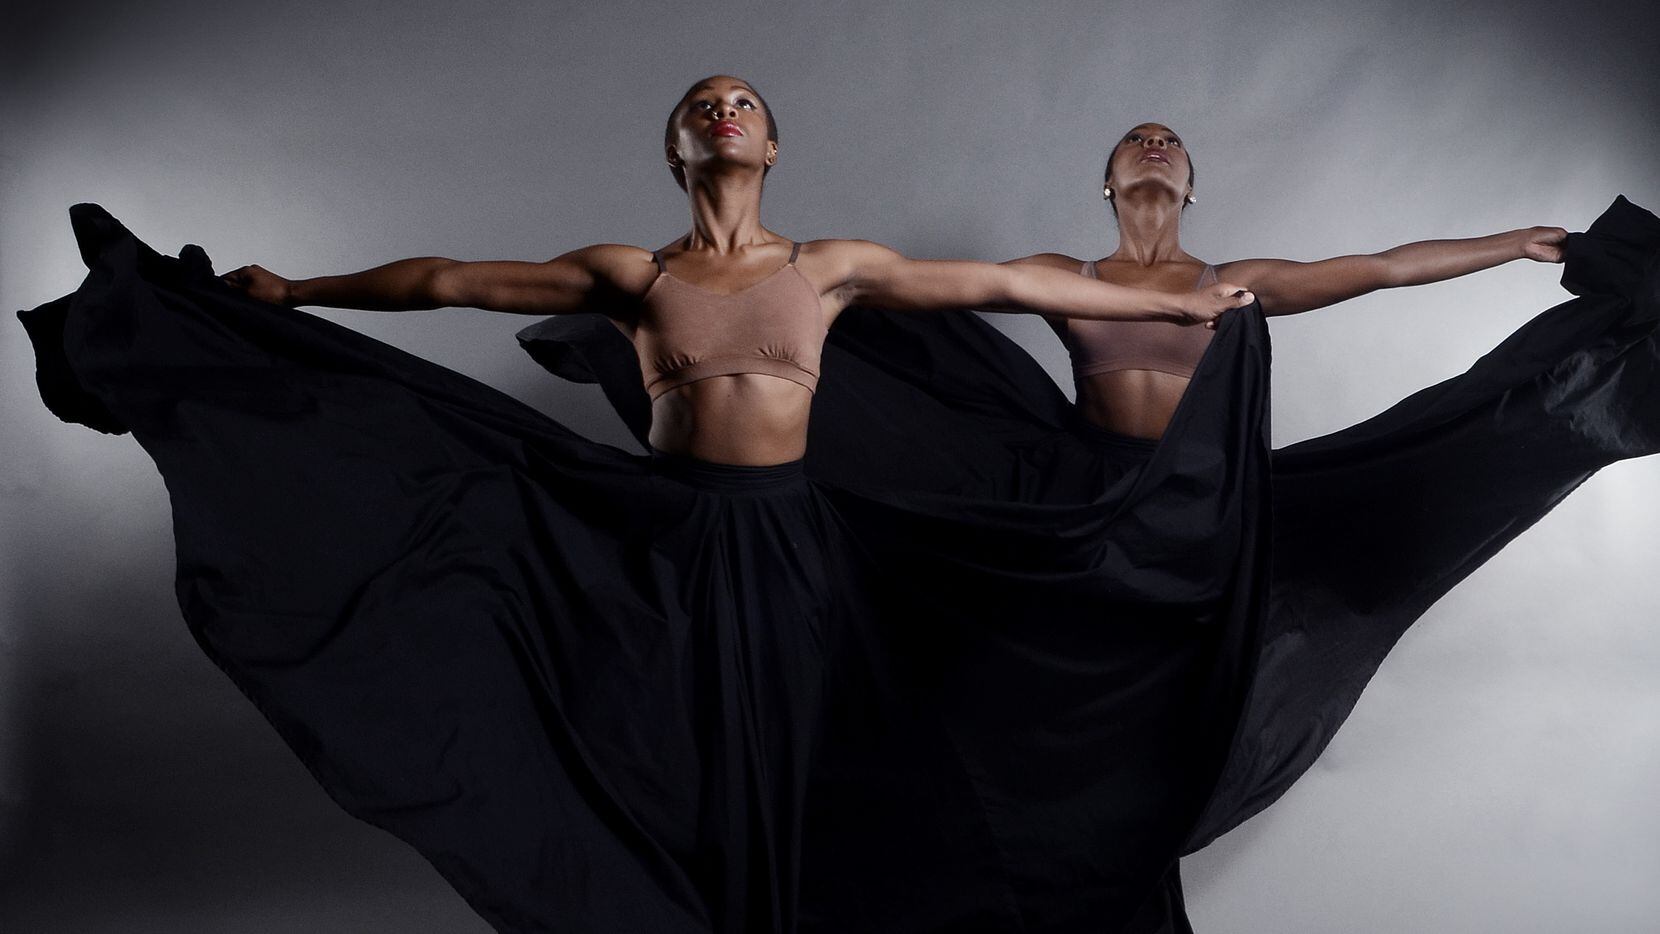 "Opaque" choreographed by Nycole Ray will be performed as part of the "Dancing Beyond...